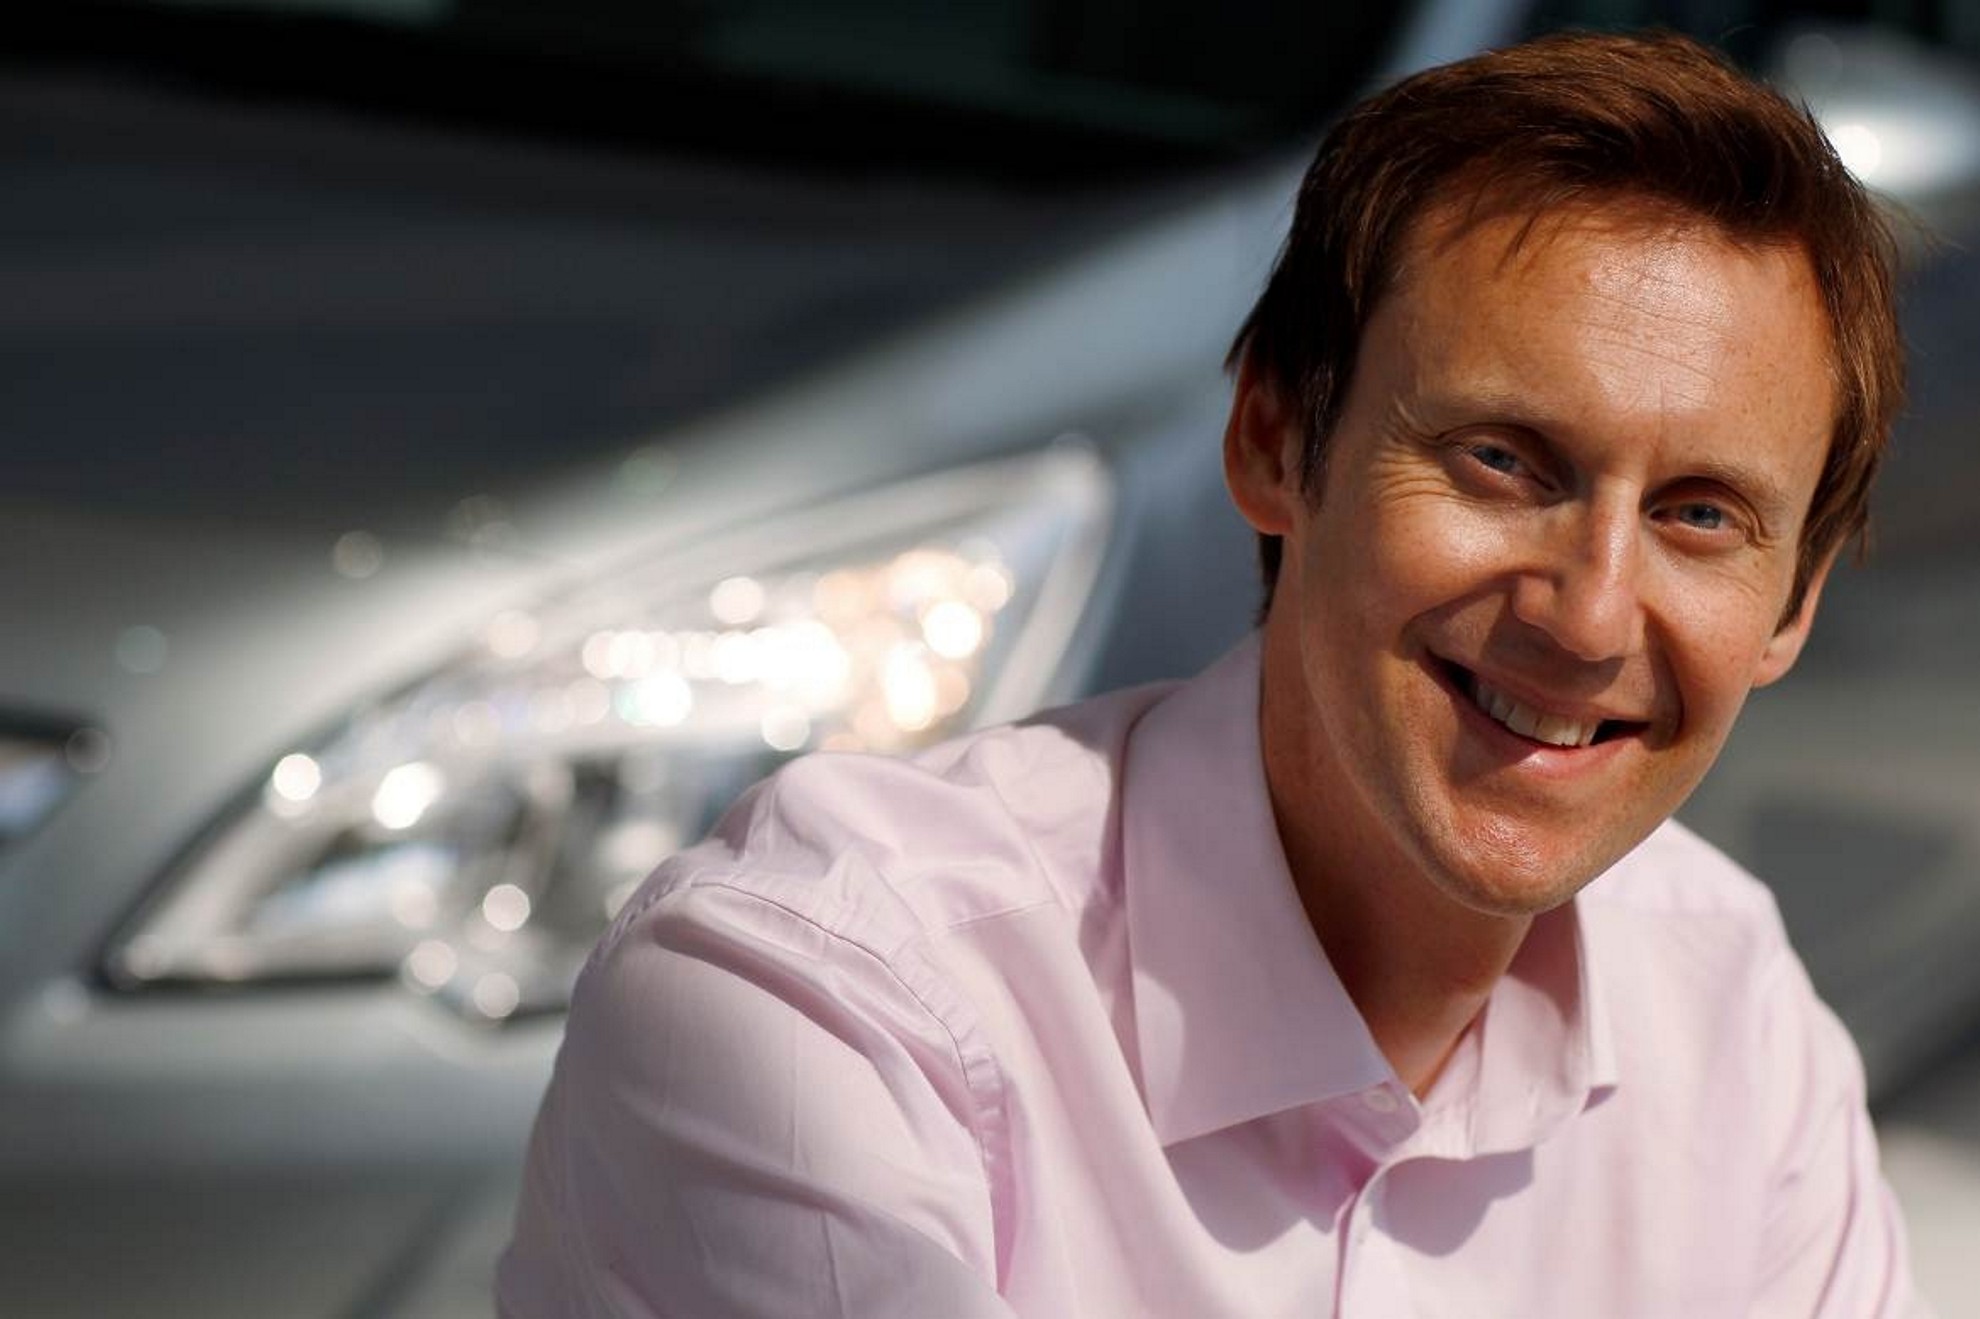 DUNCAN ALDRED APPOINTED ACTING OPEL AND VAUXHALL VICE PRESIDENT, SALES, MARKETING AND AFTERSALES